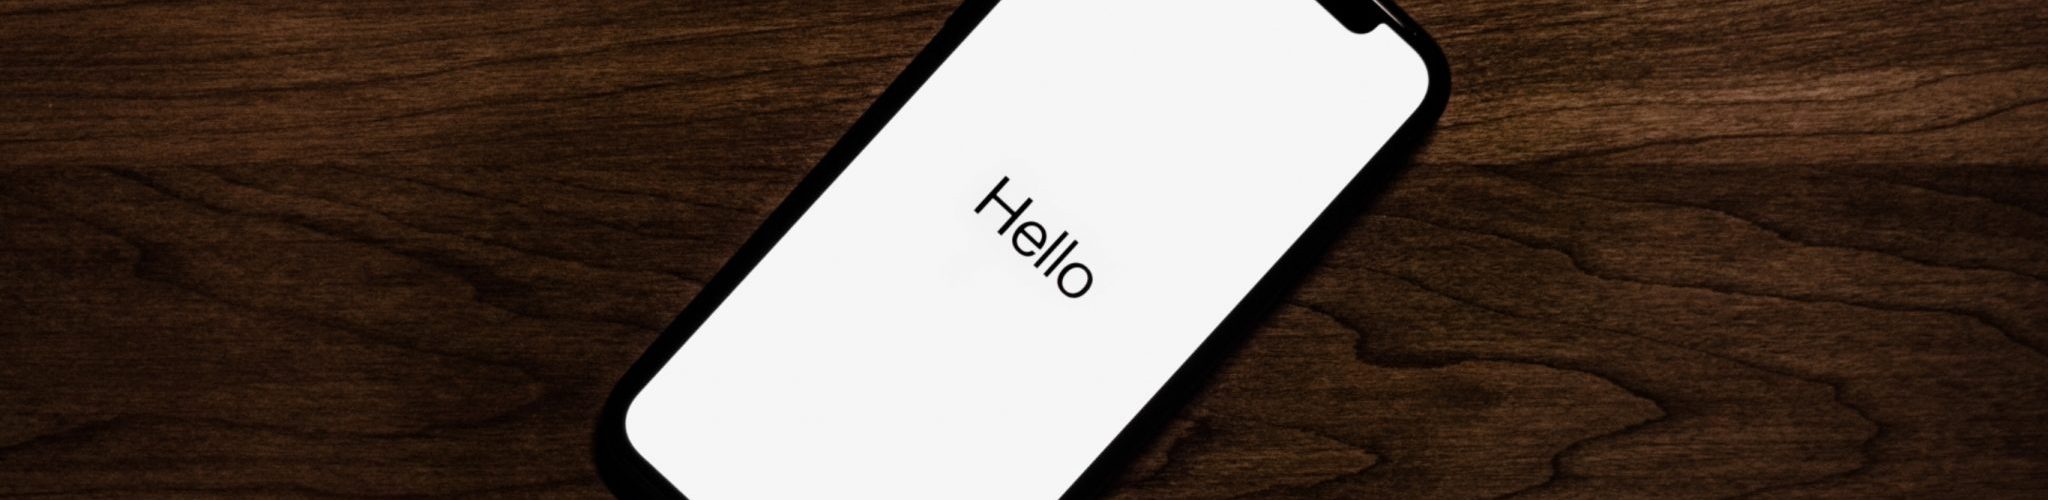 IPhone with white screen and just the word hello on it